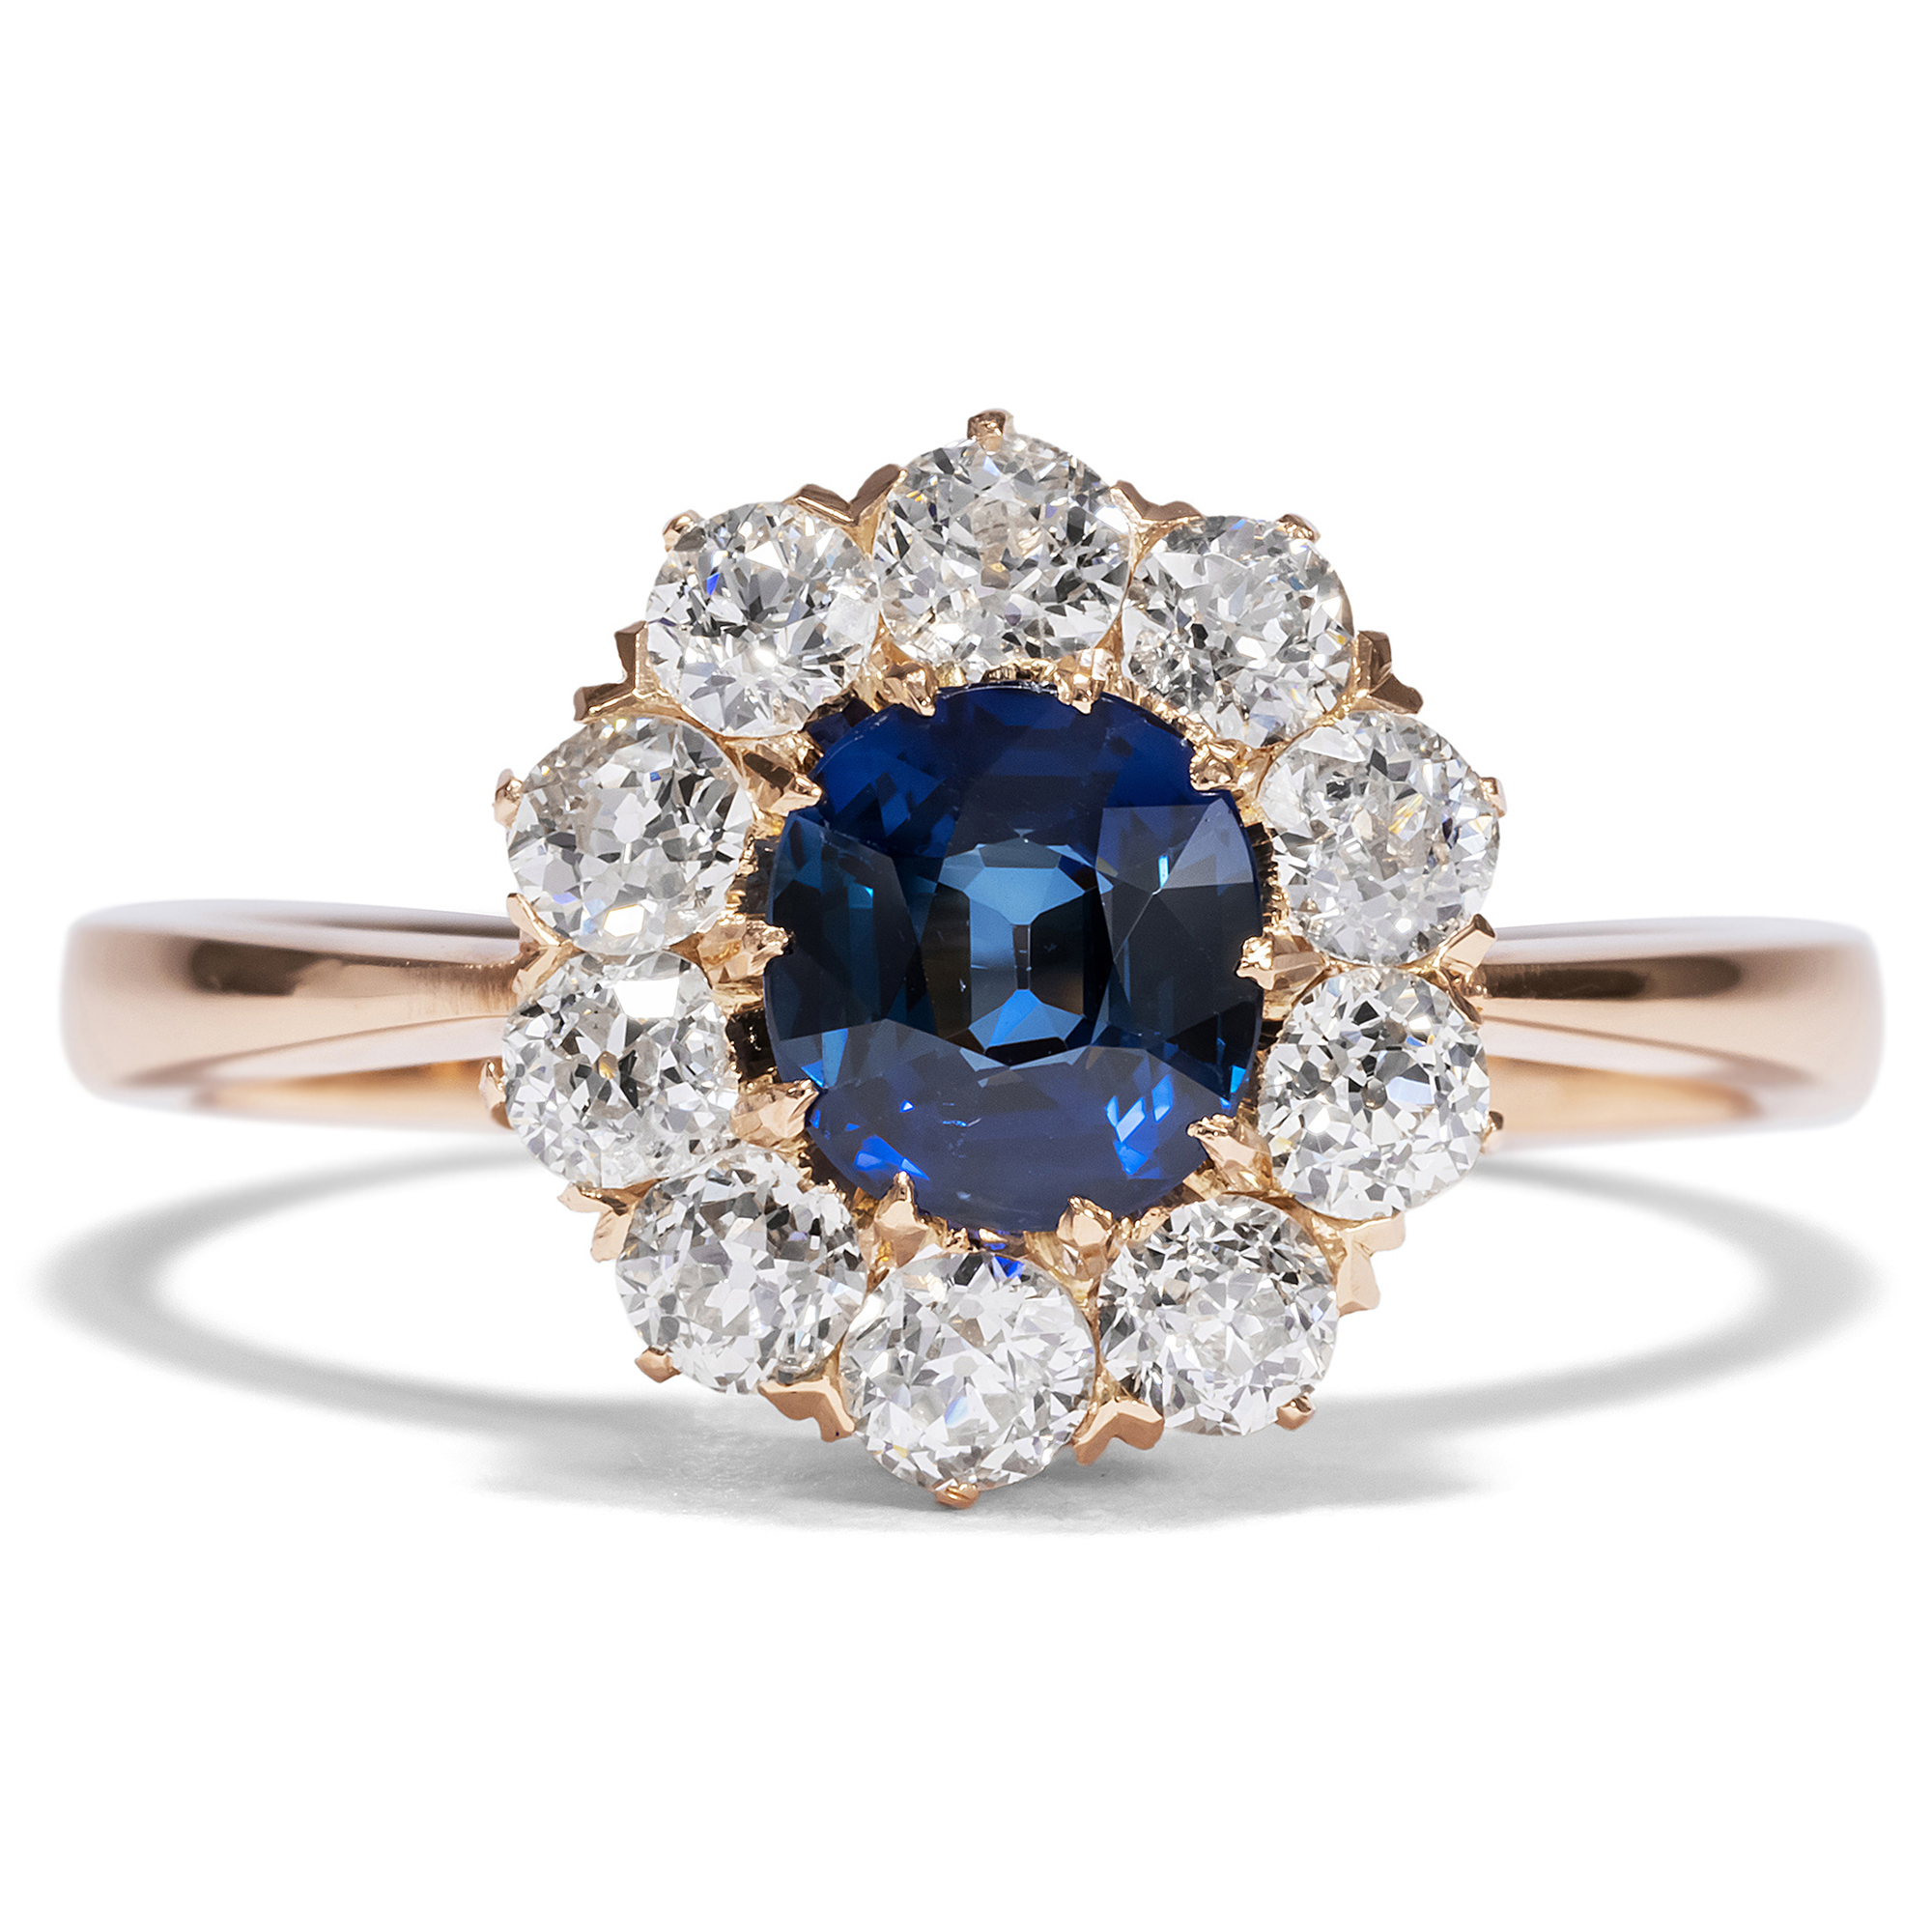 Antique Entourage Ring with Blue Sapphire & Diamonds in Rosé Gold, ca. 1890